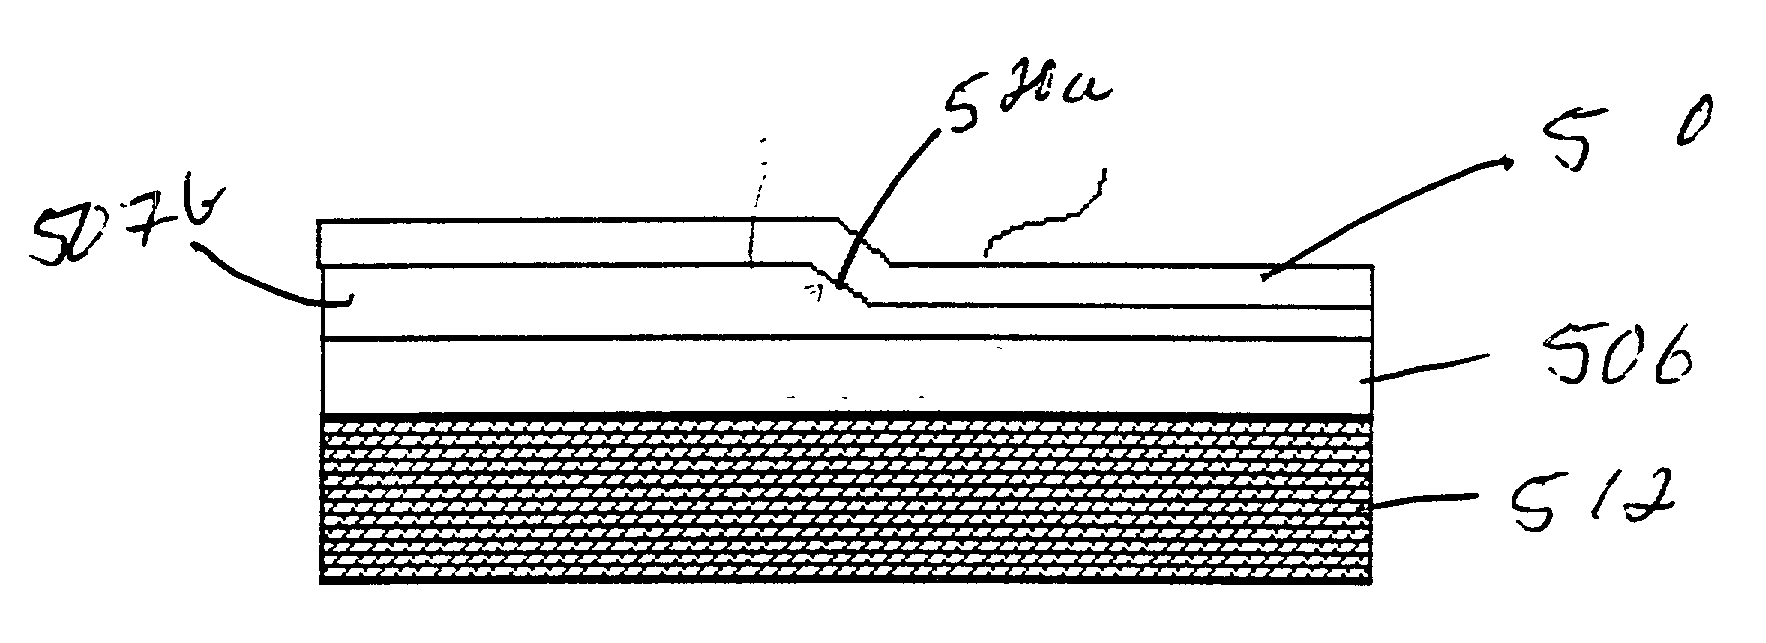 Optical switching apparatus with adiabatic coupling to optical fiber